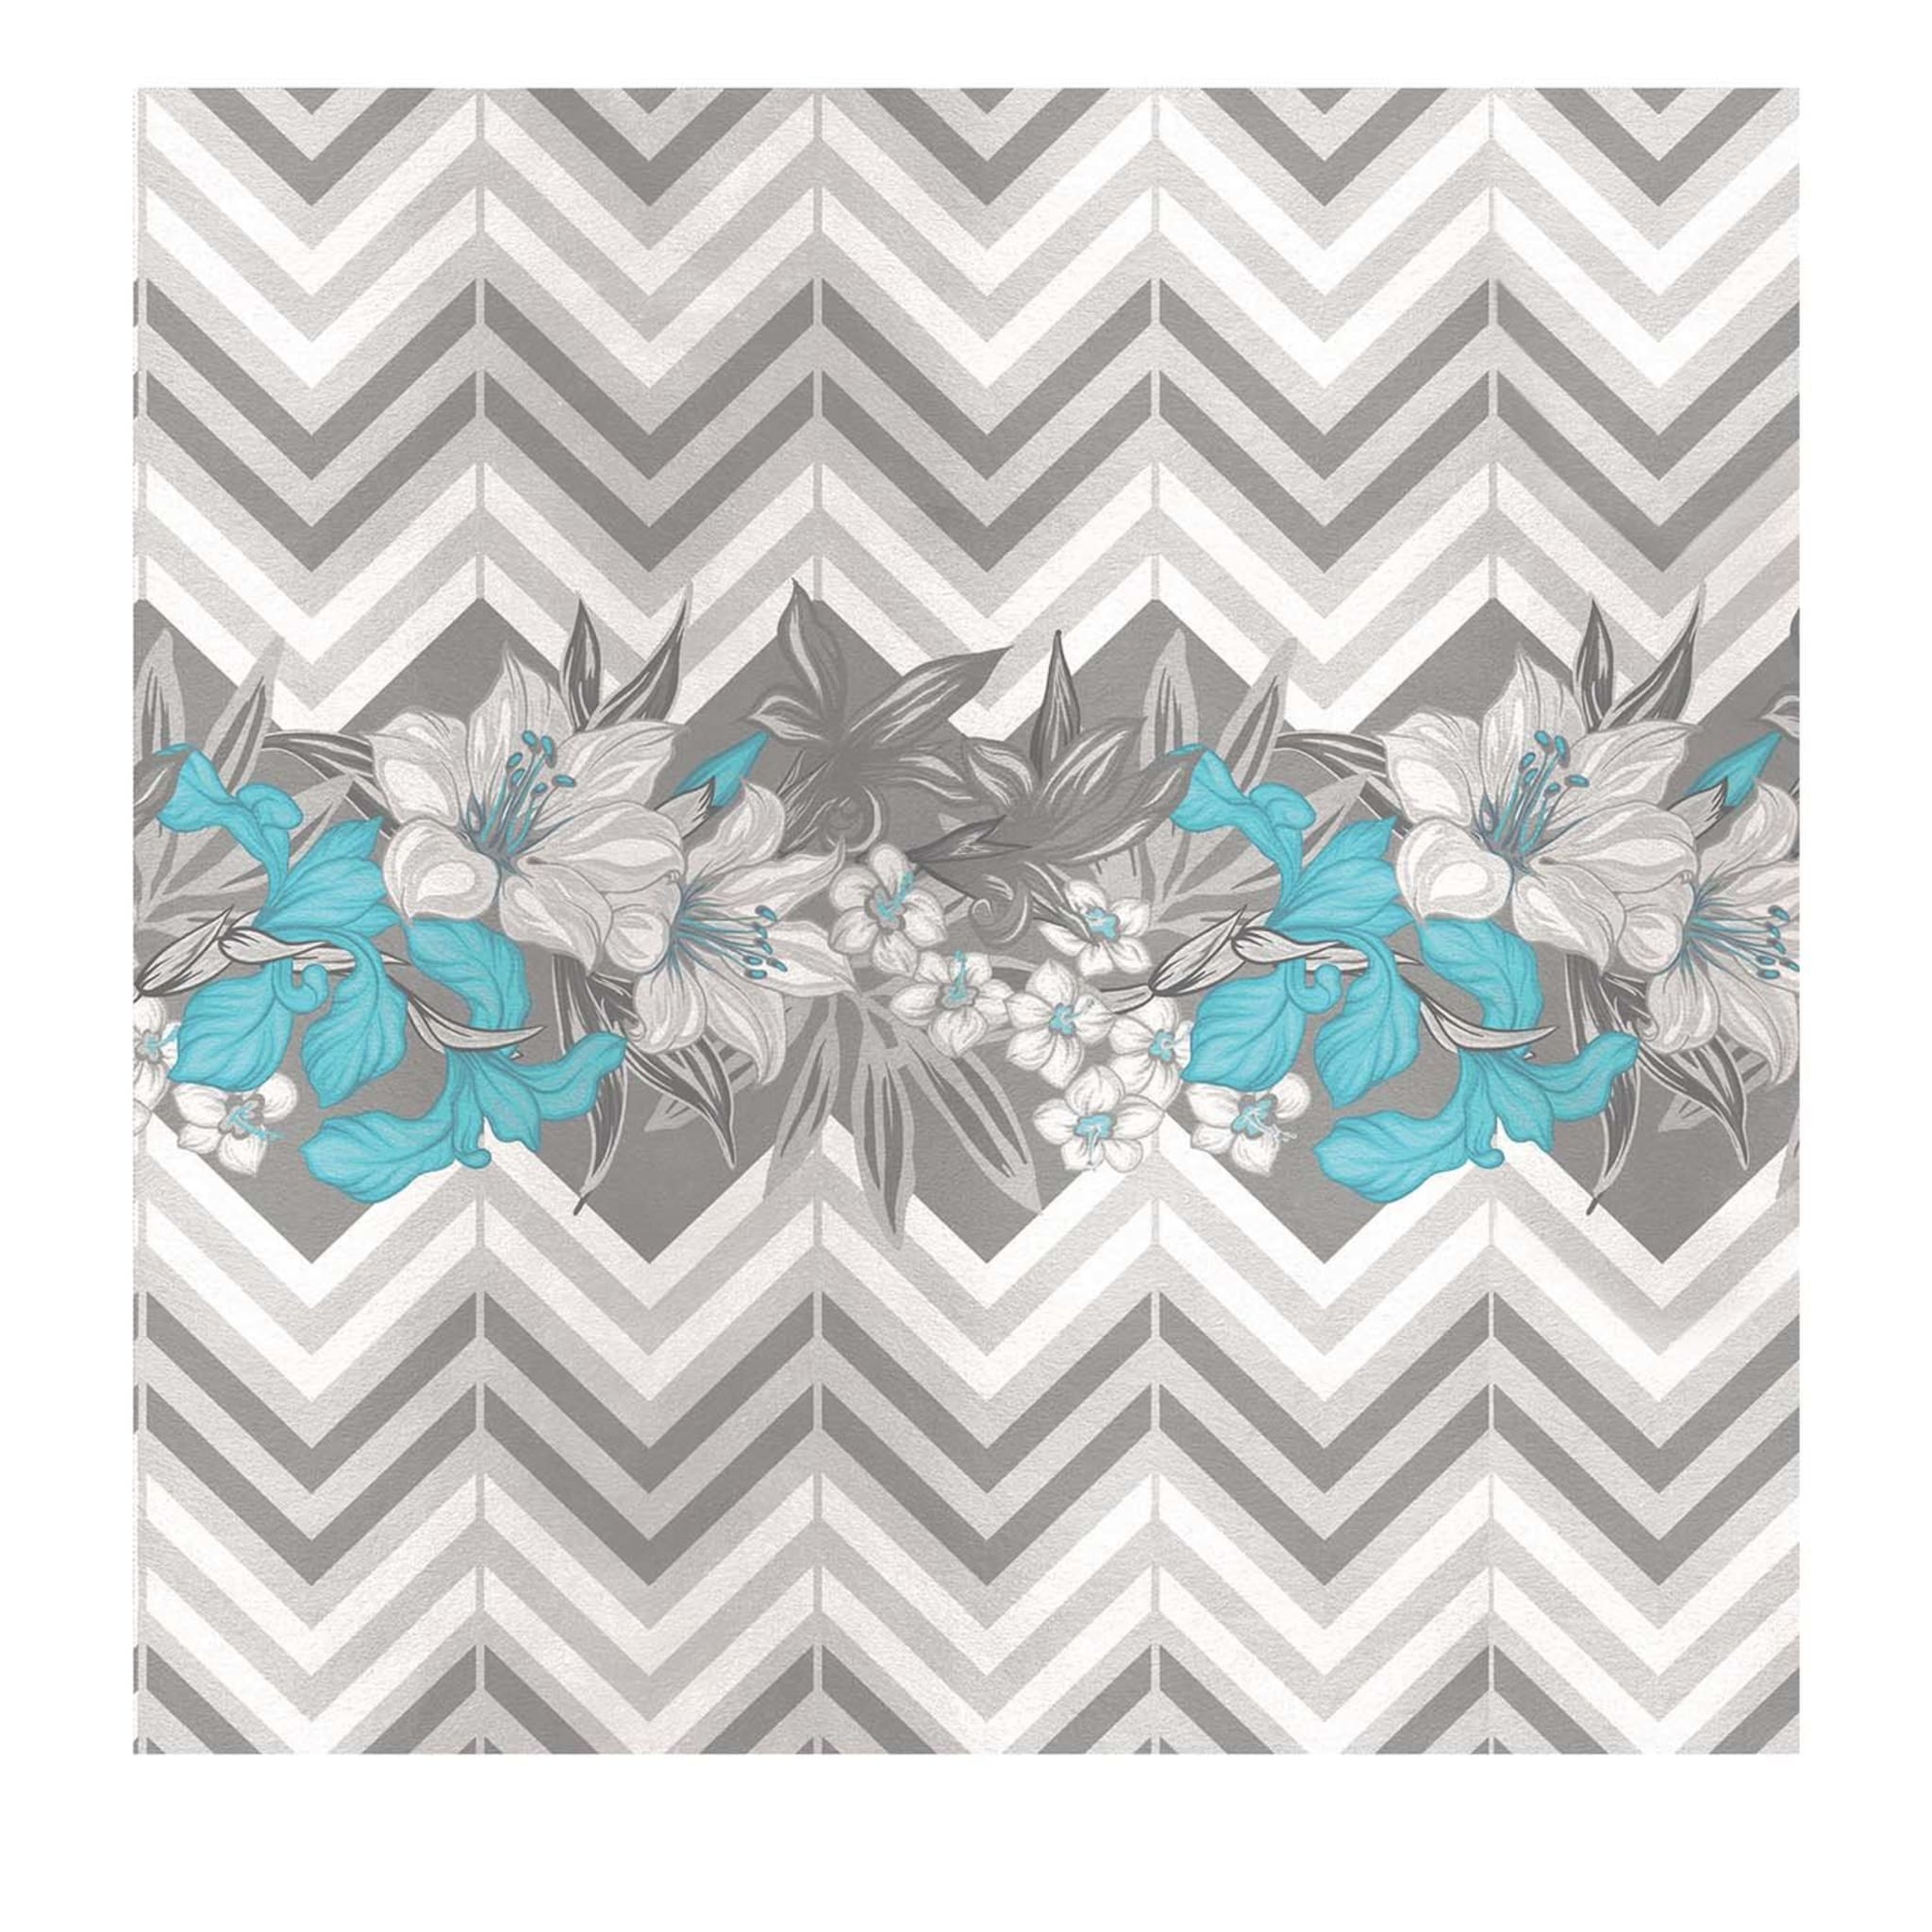 Flowers and Chevron Pattern Grey Panel #3 - Main view